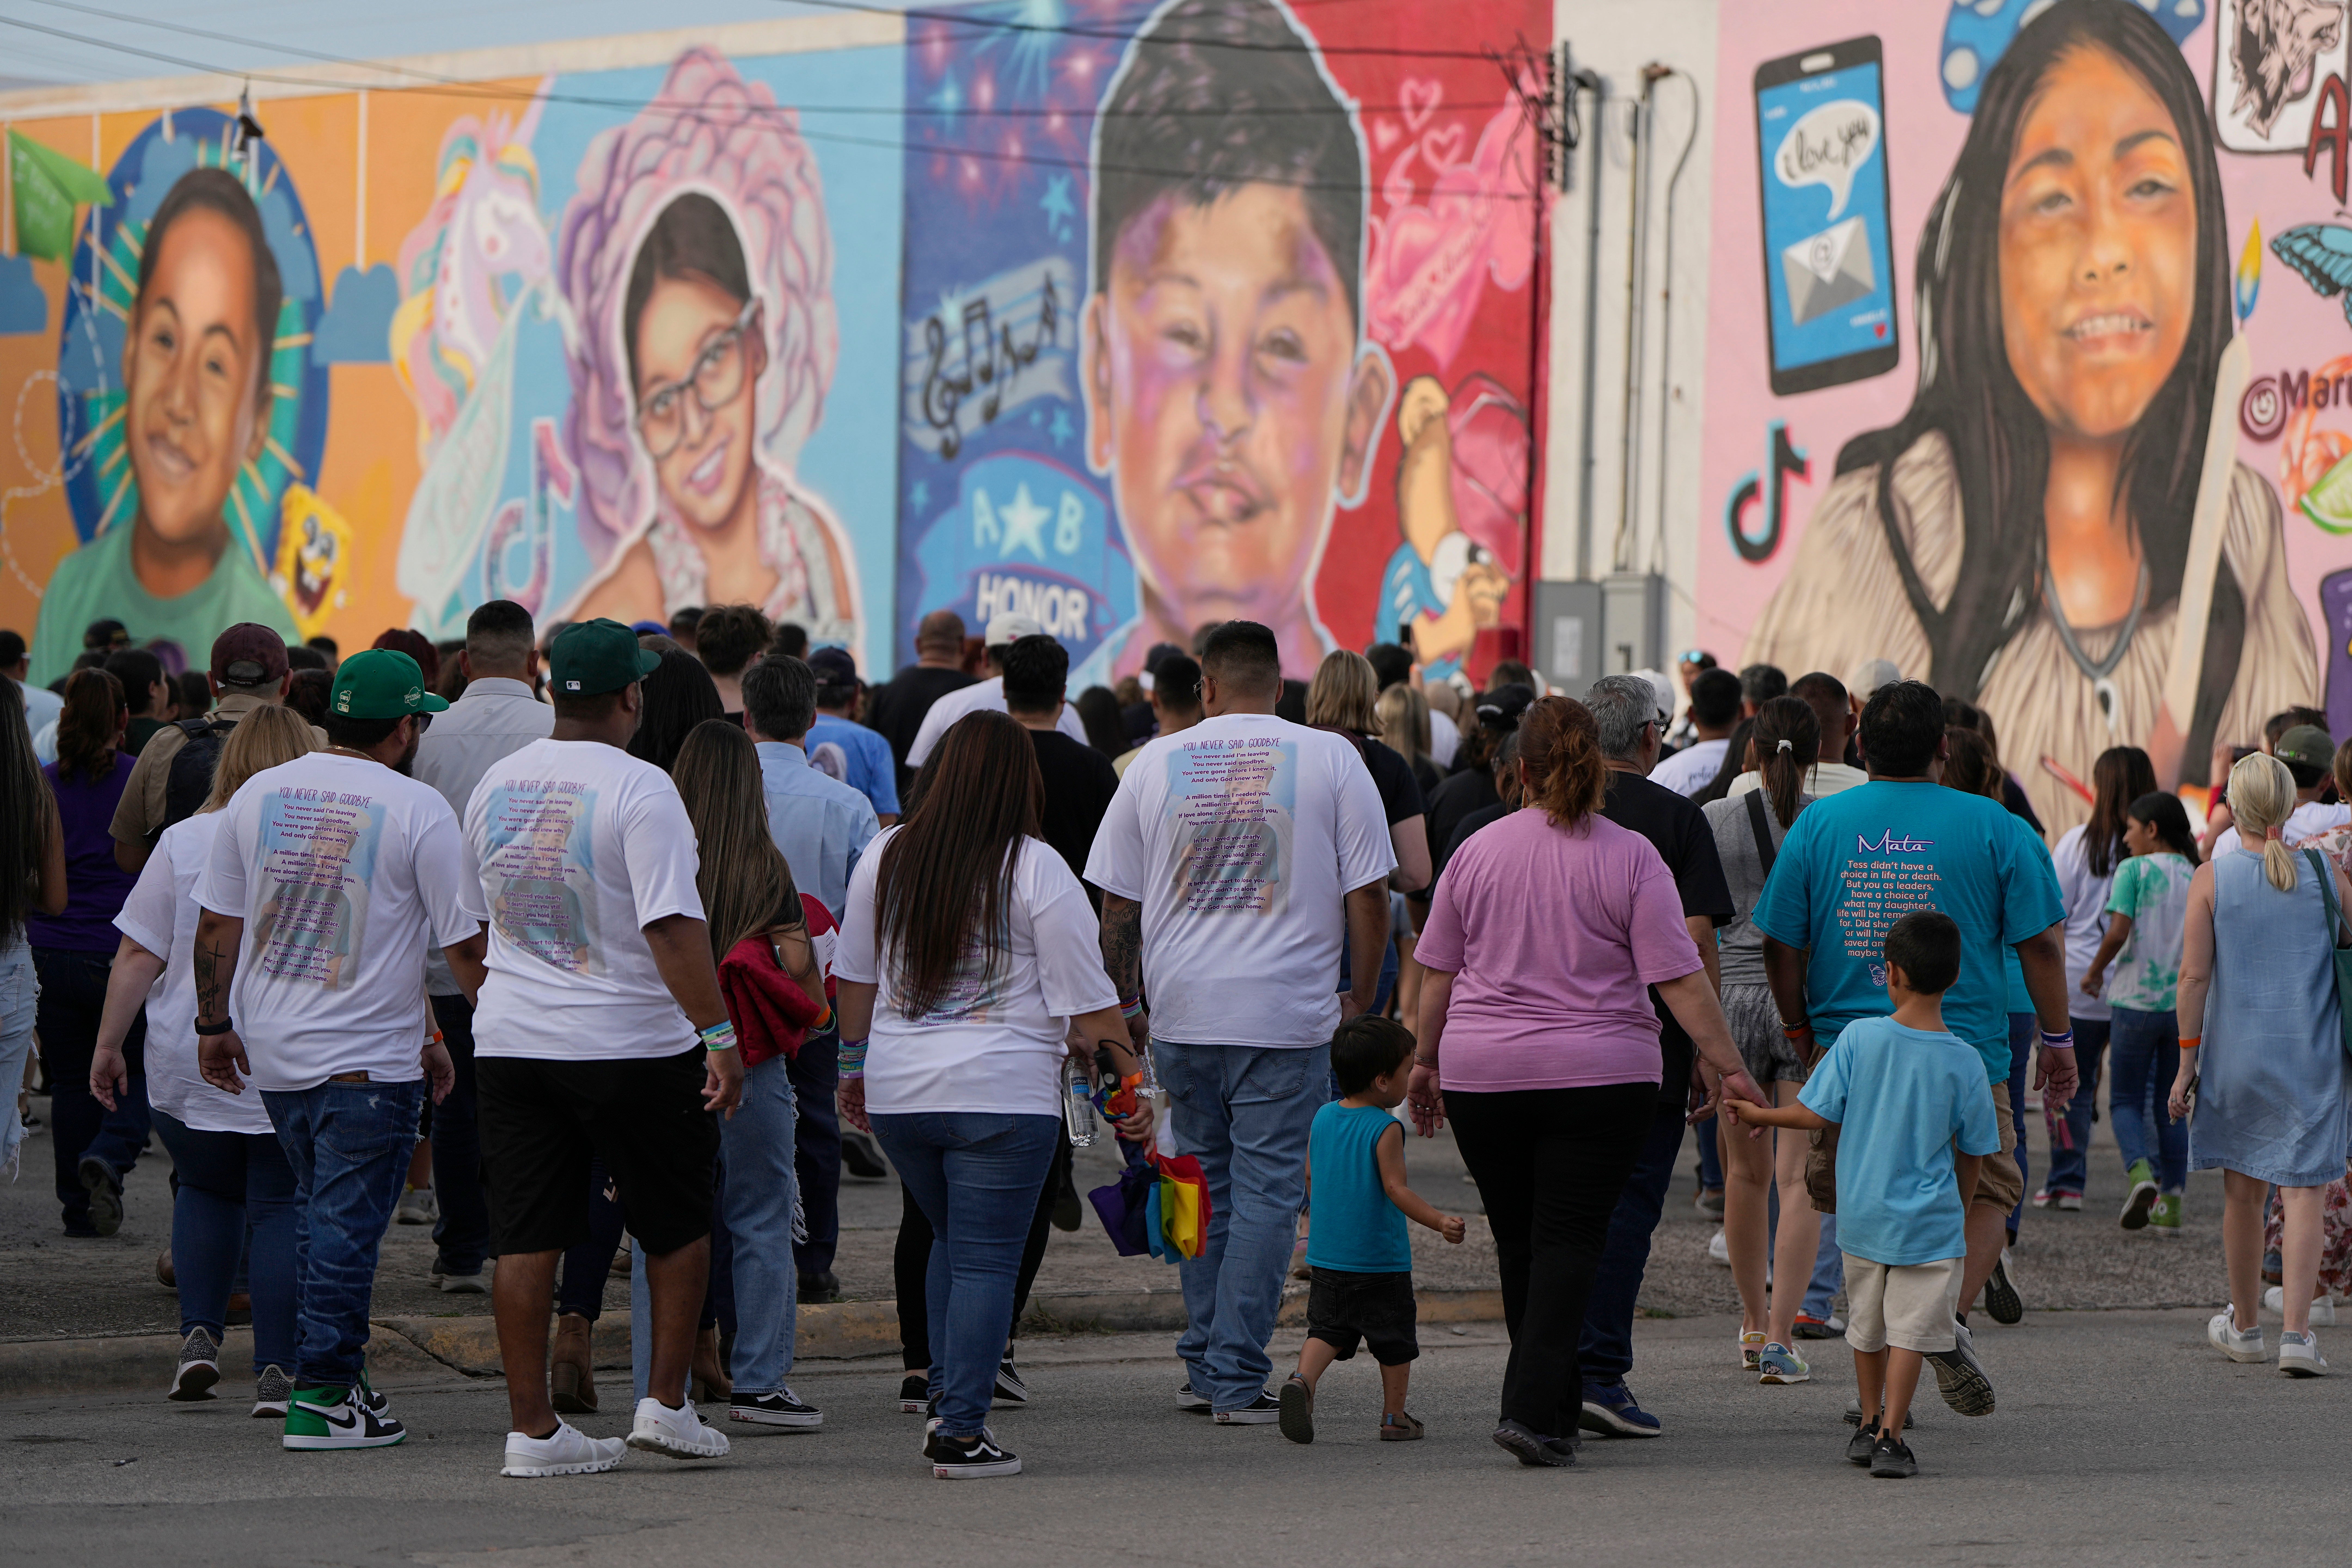 Border communities like Uvalde, the site of a horrific 2022 school shooting, have suffered from decades of under-investment, leaving them without hospitals, even as billions are spent on border security